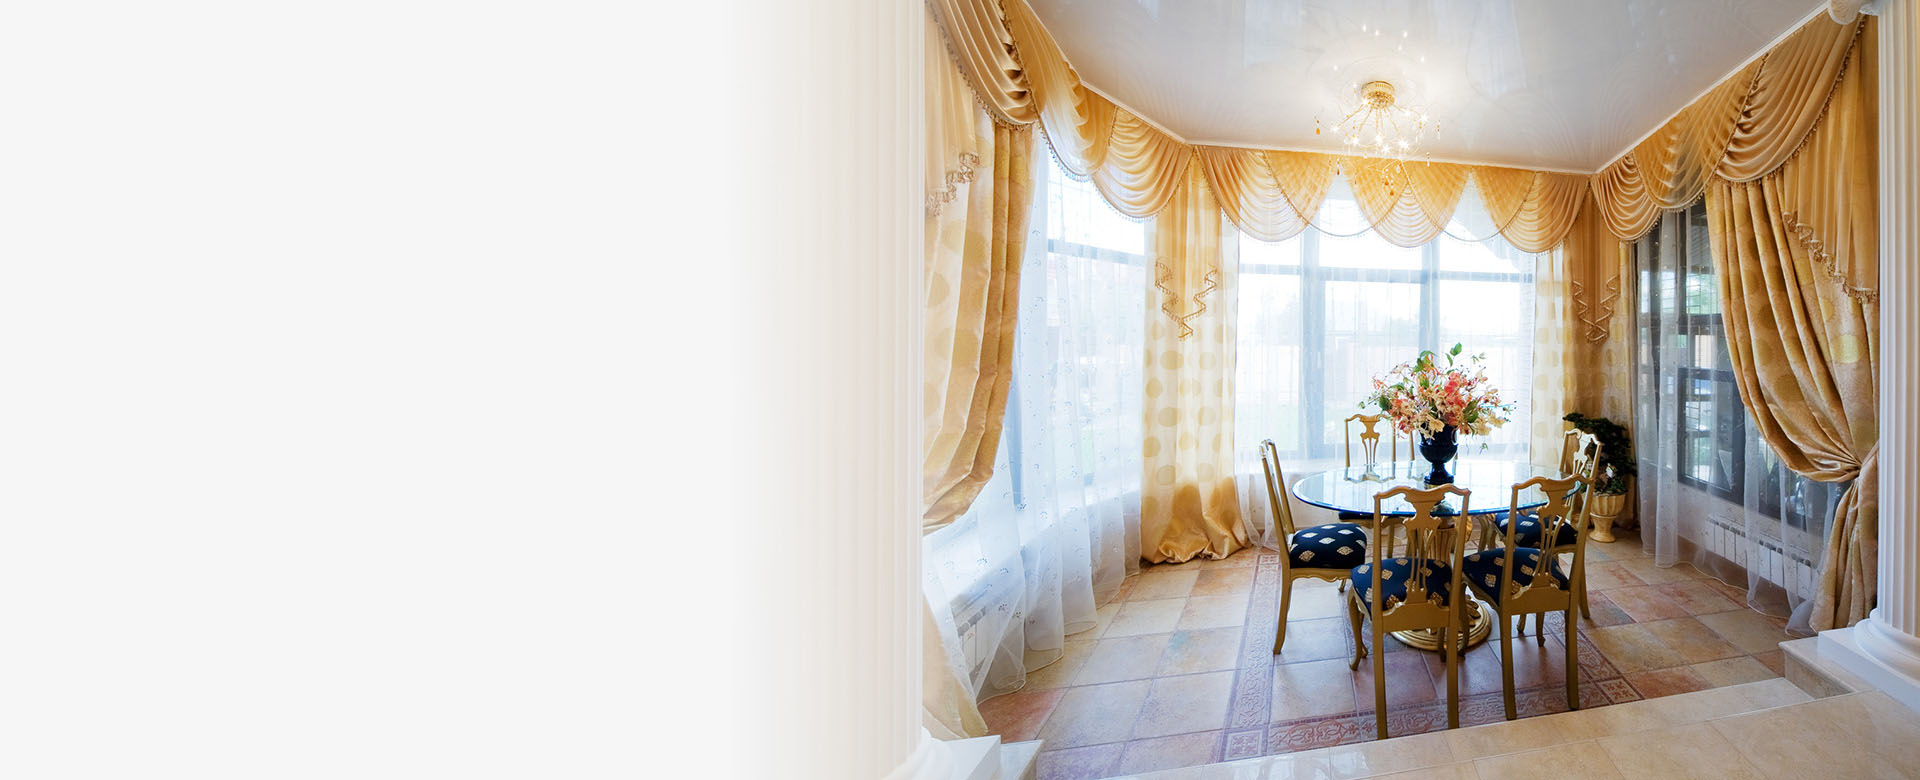 Window Coverings & Window Treatments Mississauga